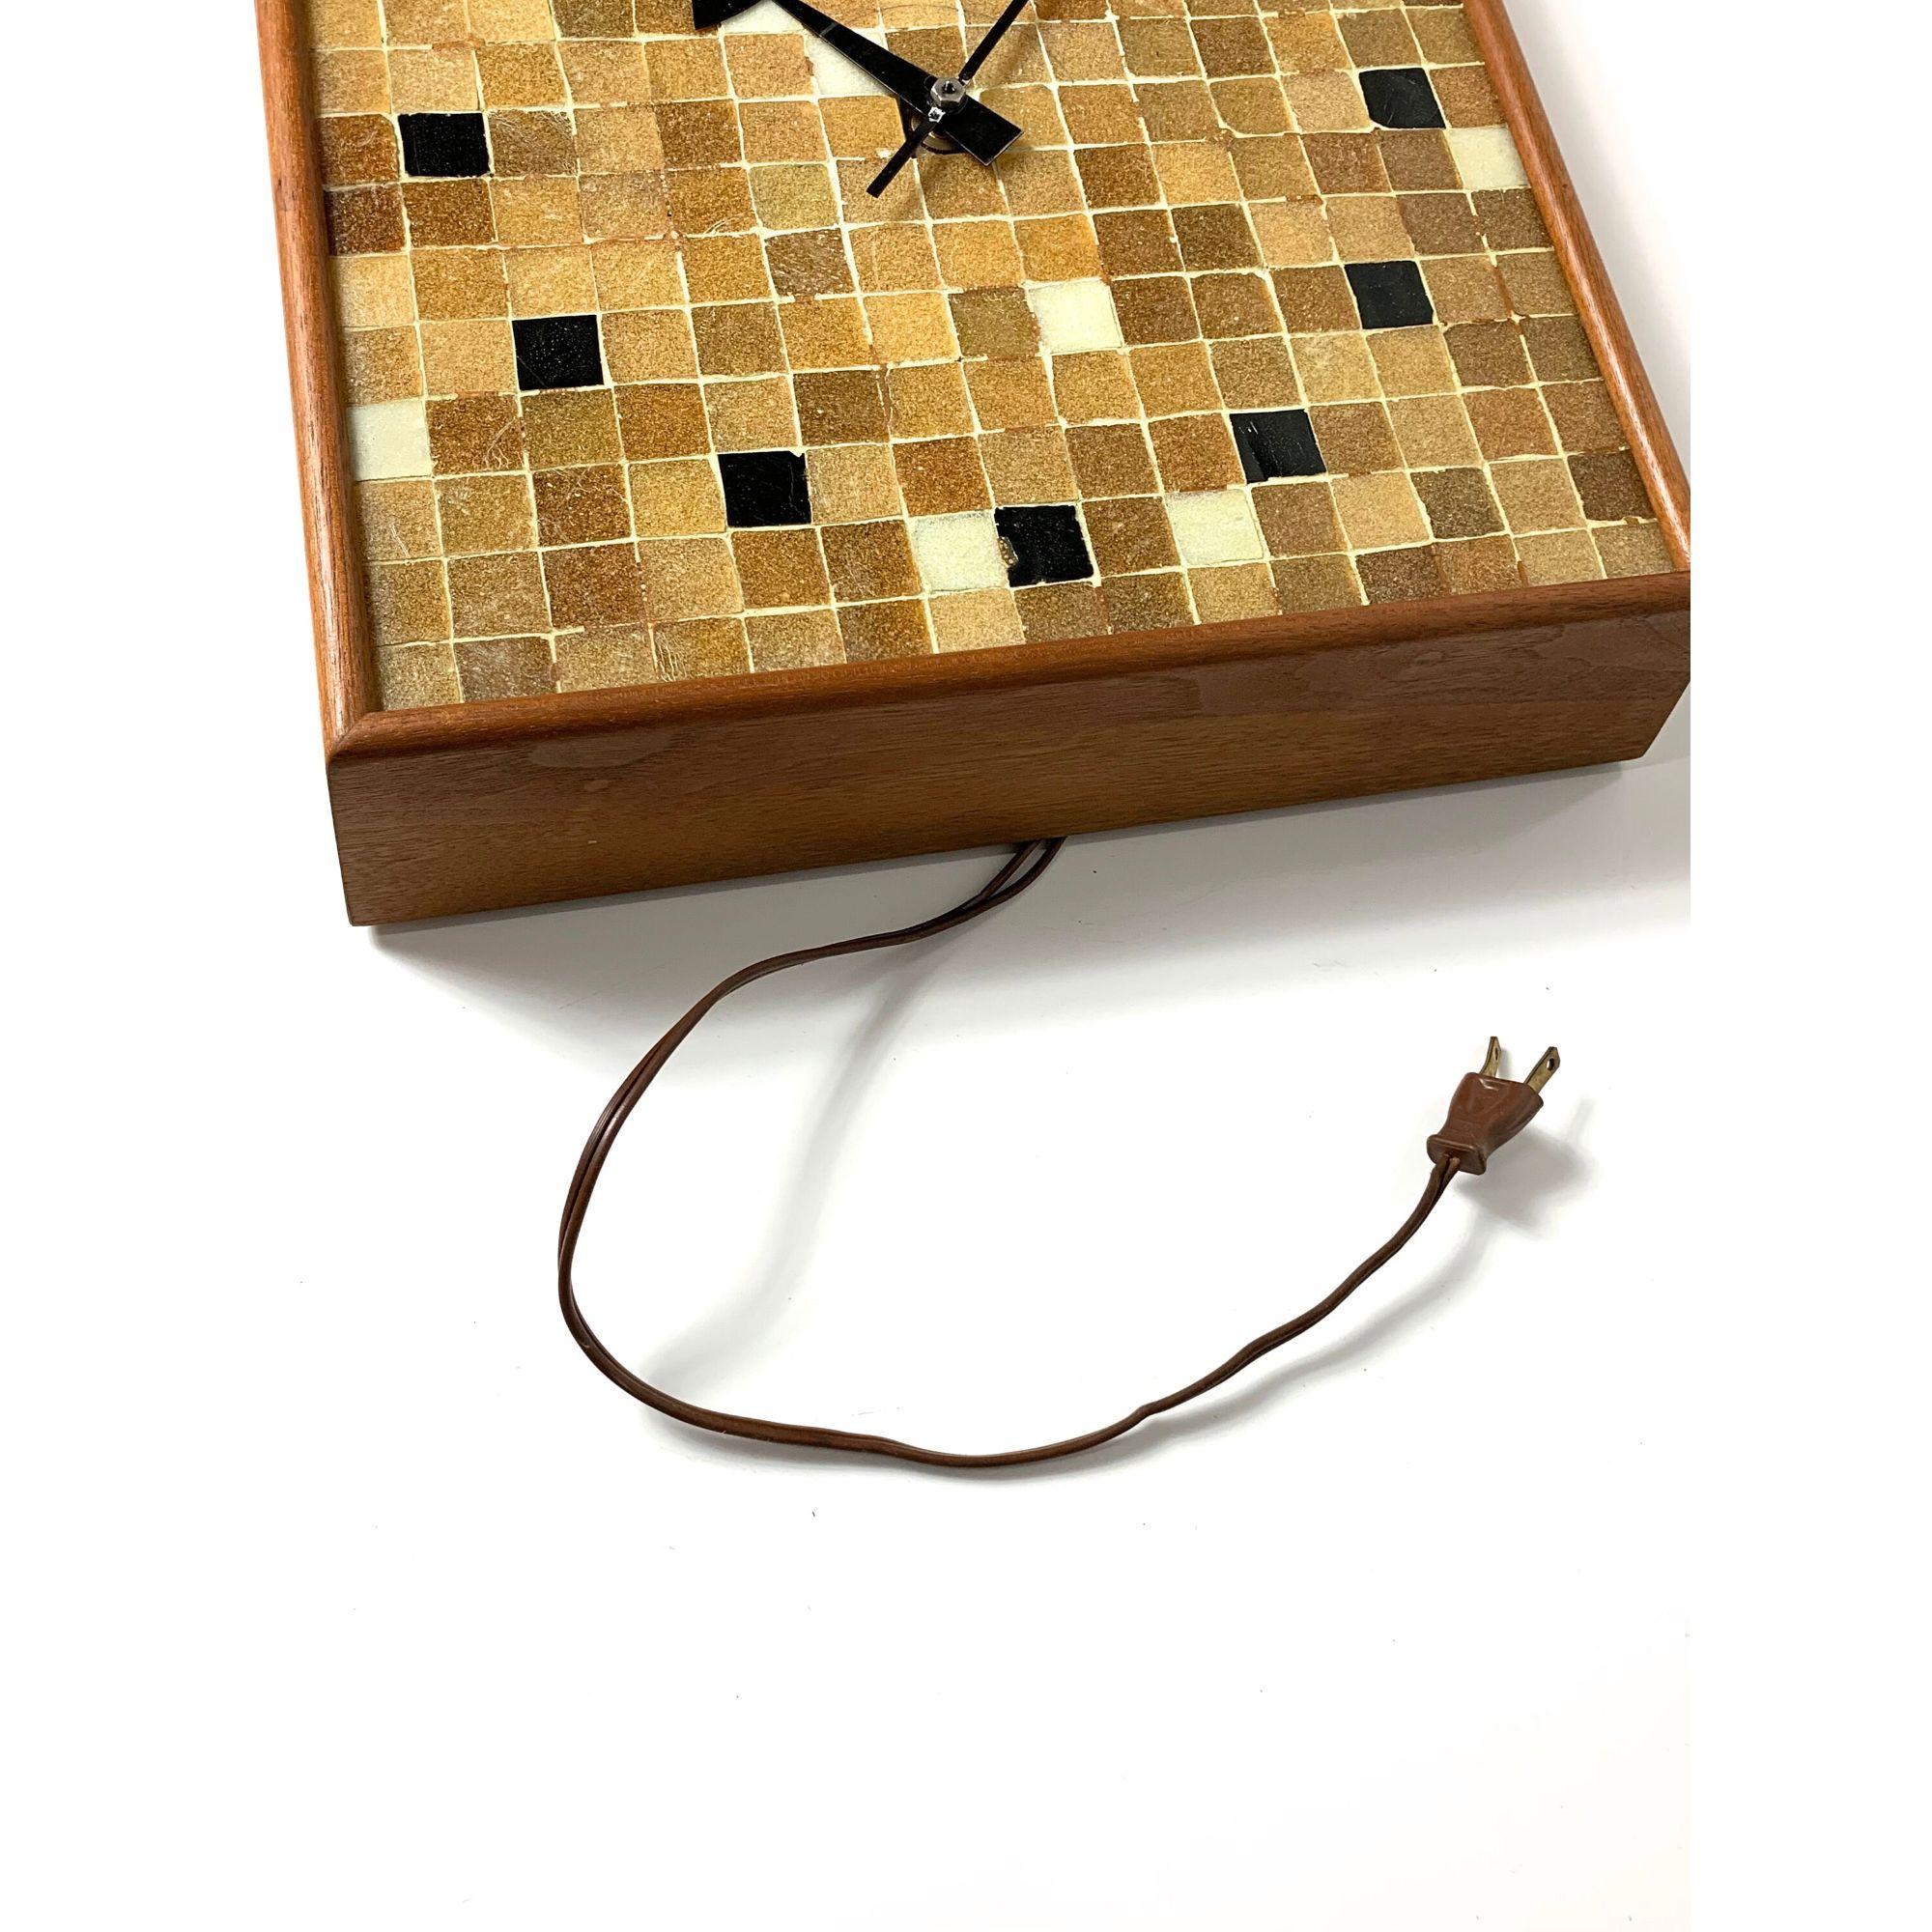 Rare Mosaic Tile Wall Clock in Walnut by George Nelson & Assoc circa 1950s For Sale 1